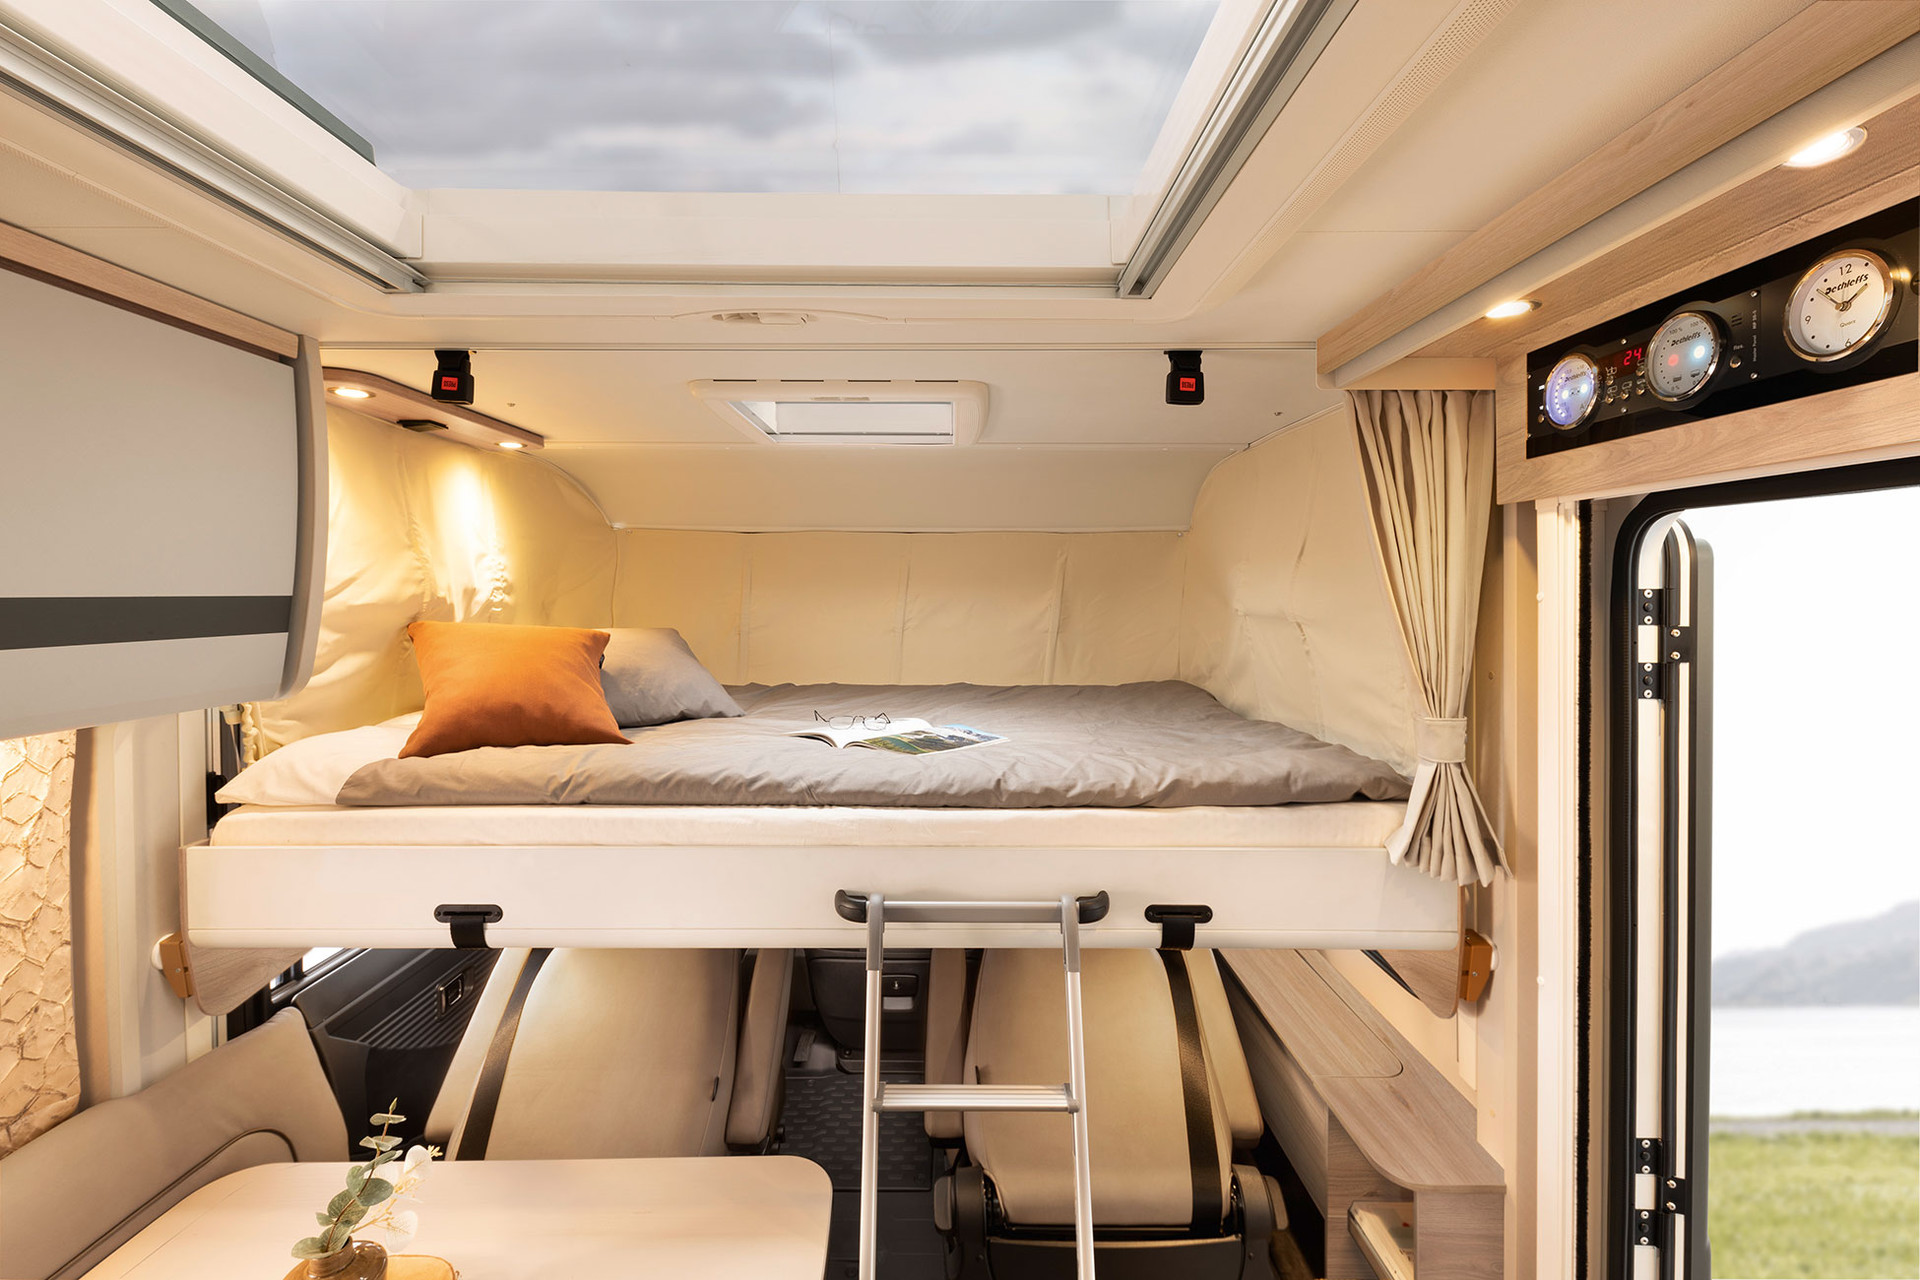 The pull-down bed in the A Class models has a sleeping area with a width of 150 cm